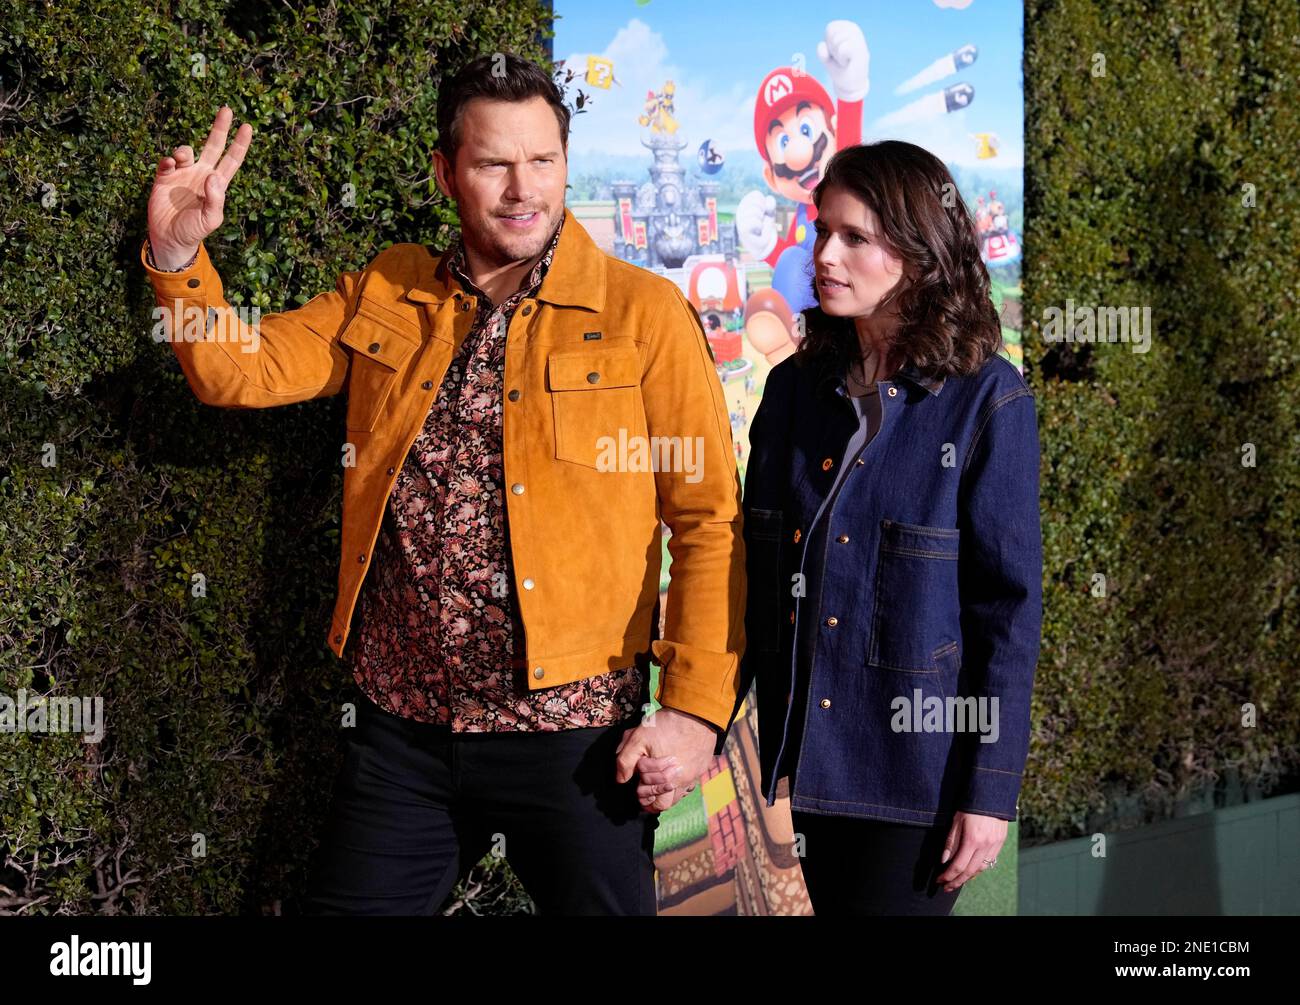 Chris Pratt and his wife Katherine Schwarzenegger pose together at the Super Nintendo World grand opening press event, Wednesday, Feb. 15, 2023, at Universal Studios Hollywood in Universal City, Calif. (AP Photo/Chris Pizzello) Stock Photo